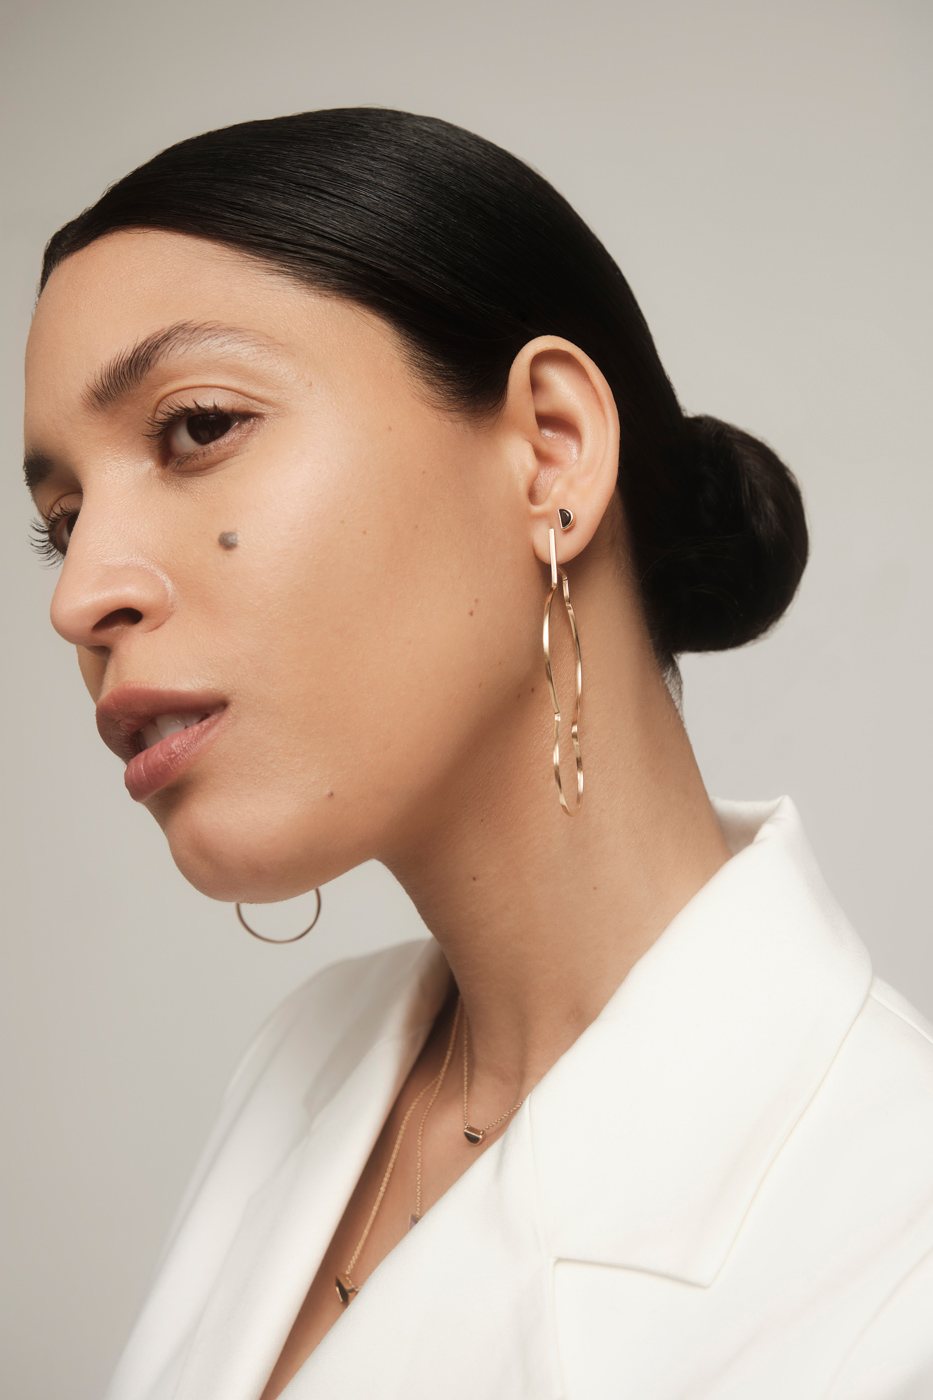 A woman with sleek hair styled in a low bun, wearing hoop earrings and a white blouse, poses with her head turned to the side, showcasing her profile.